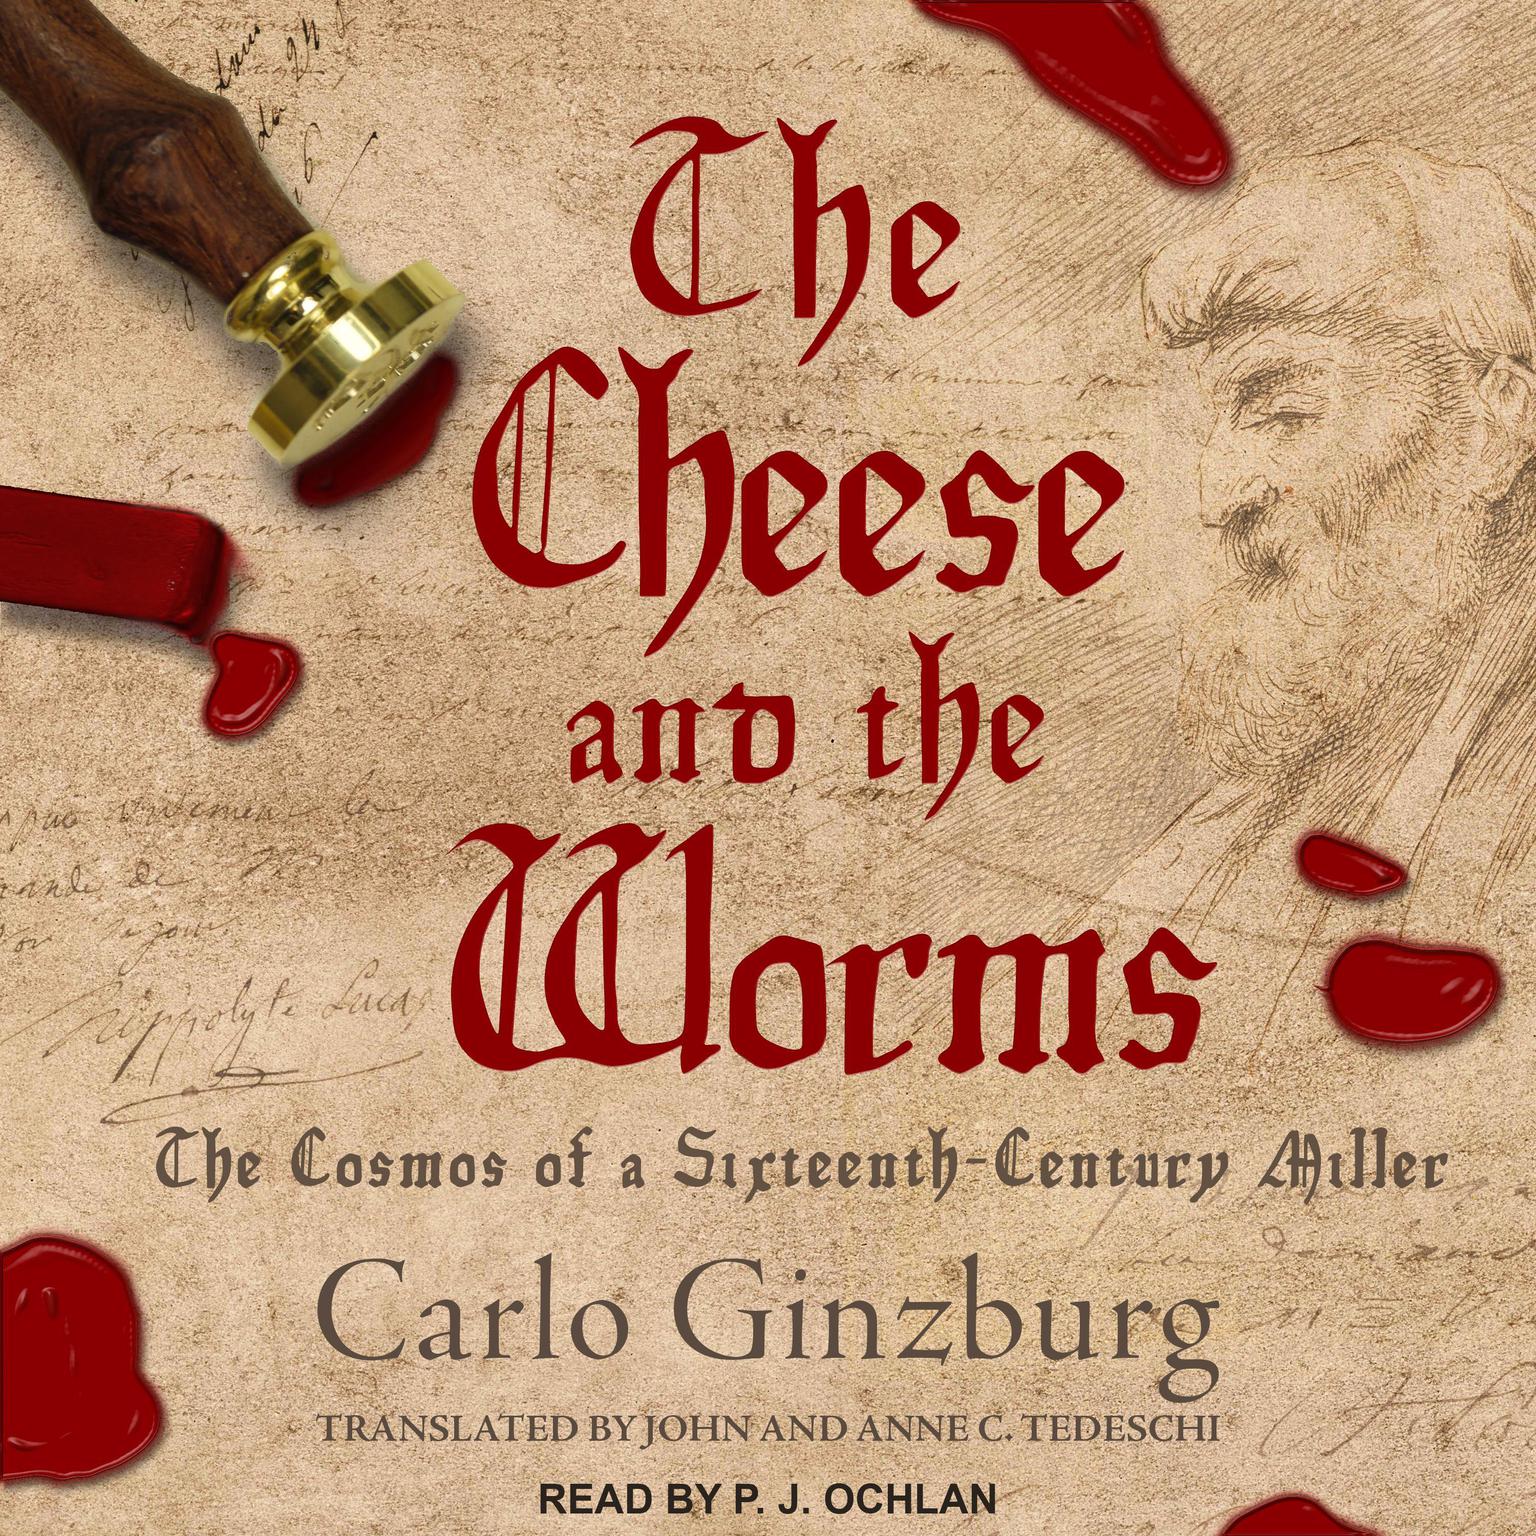 The Cheese and the Worms: The Cosmos of a Sixteenth-Century Miller Audiobook, by Carlo Ginzburg